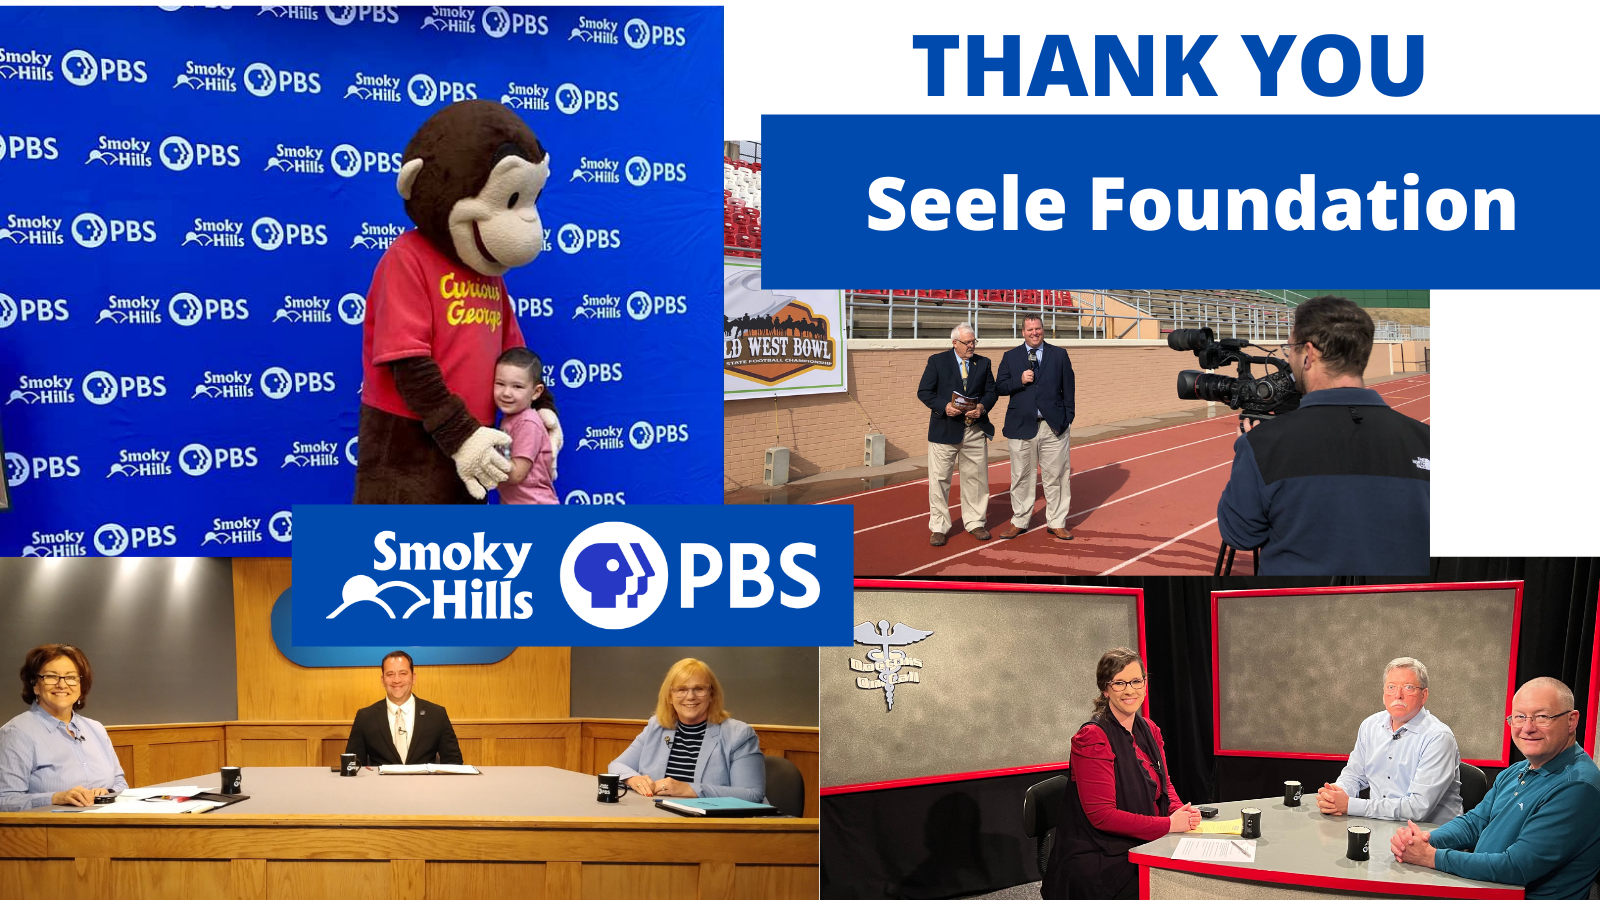 Seele Foundation has awarded Smoky Hills PBS (SHPBS) with a grant press release